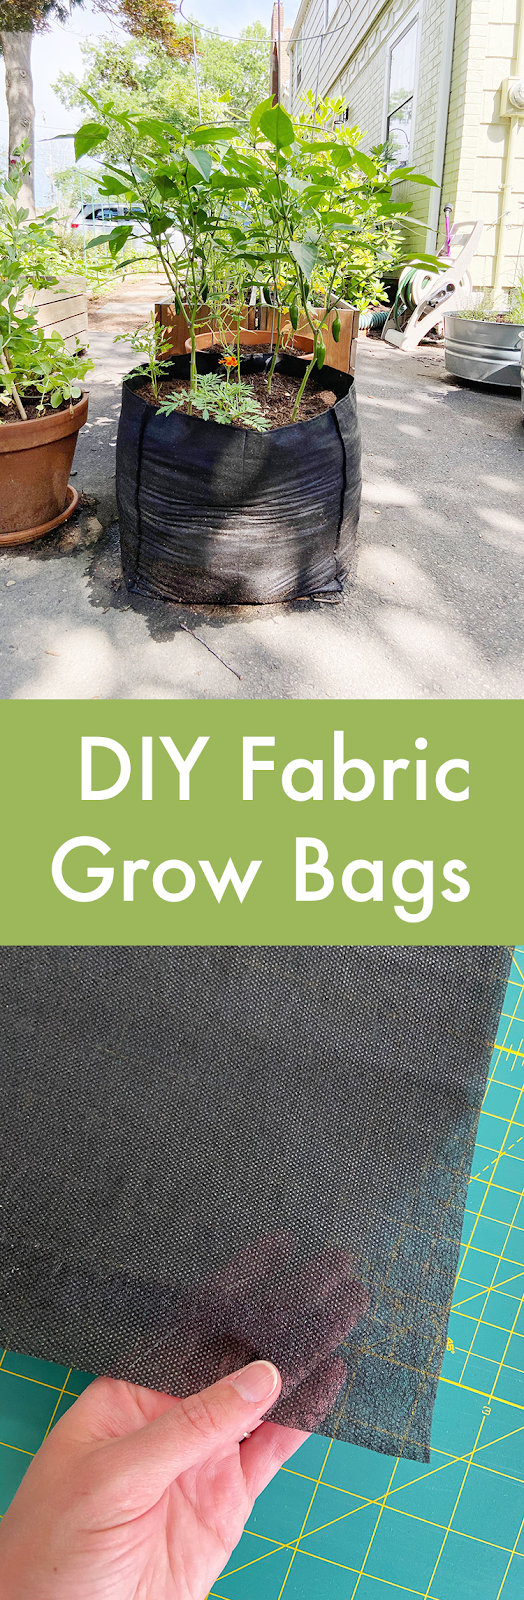 How to use fabric grow bags to grow bigger better crops